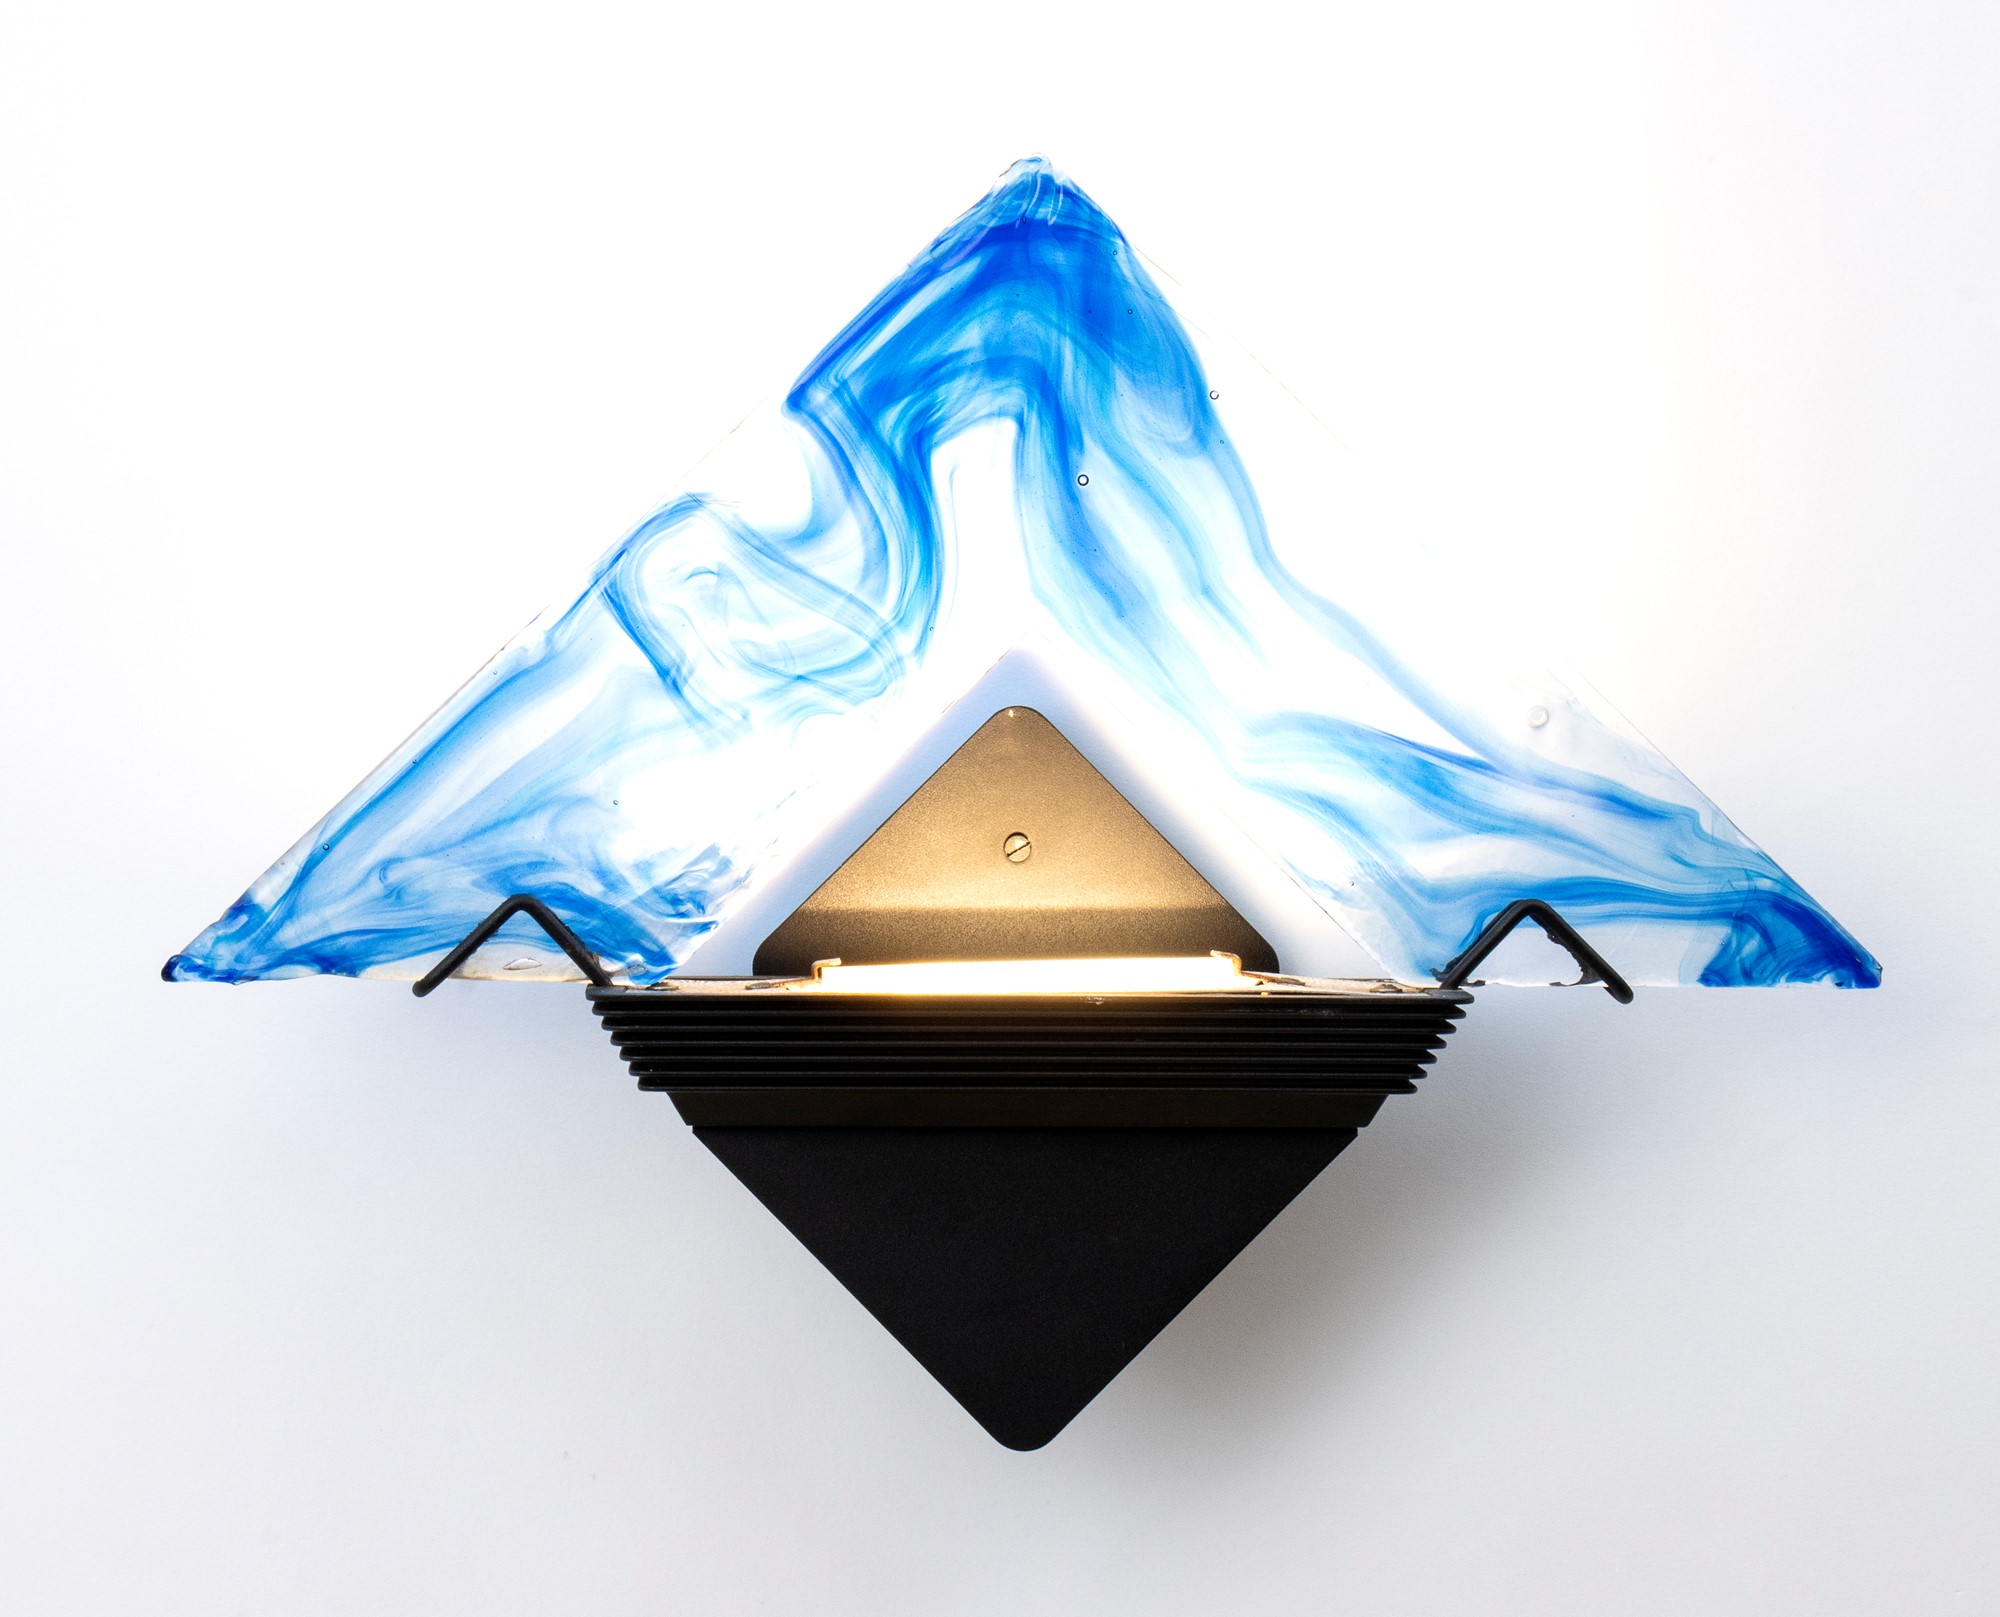 La Murrina wing lamp in hand blown Murano glass mounted on a triangular frame - Image 4 of 27